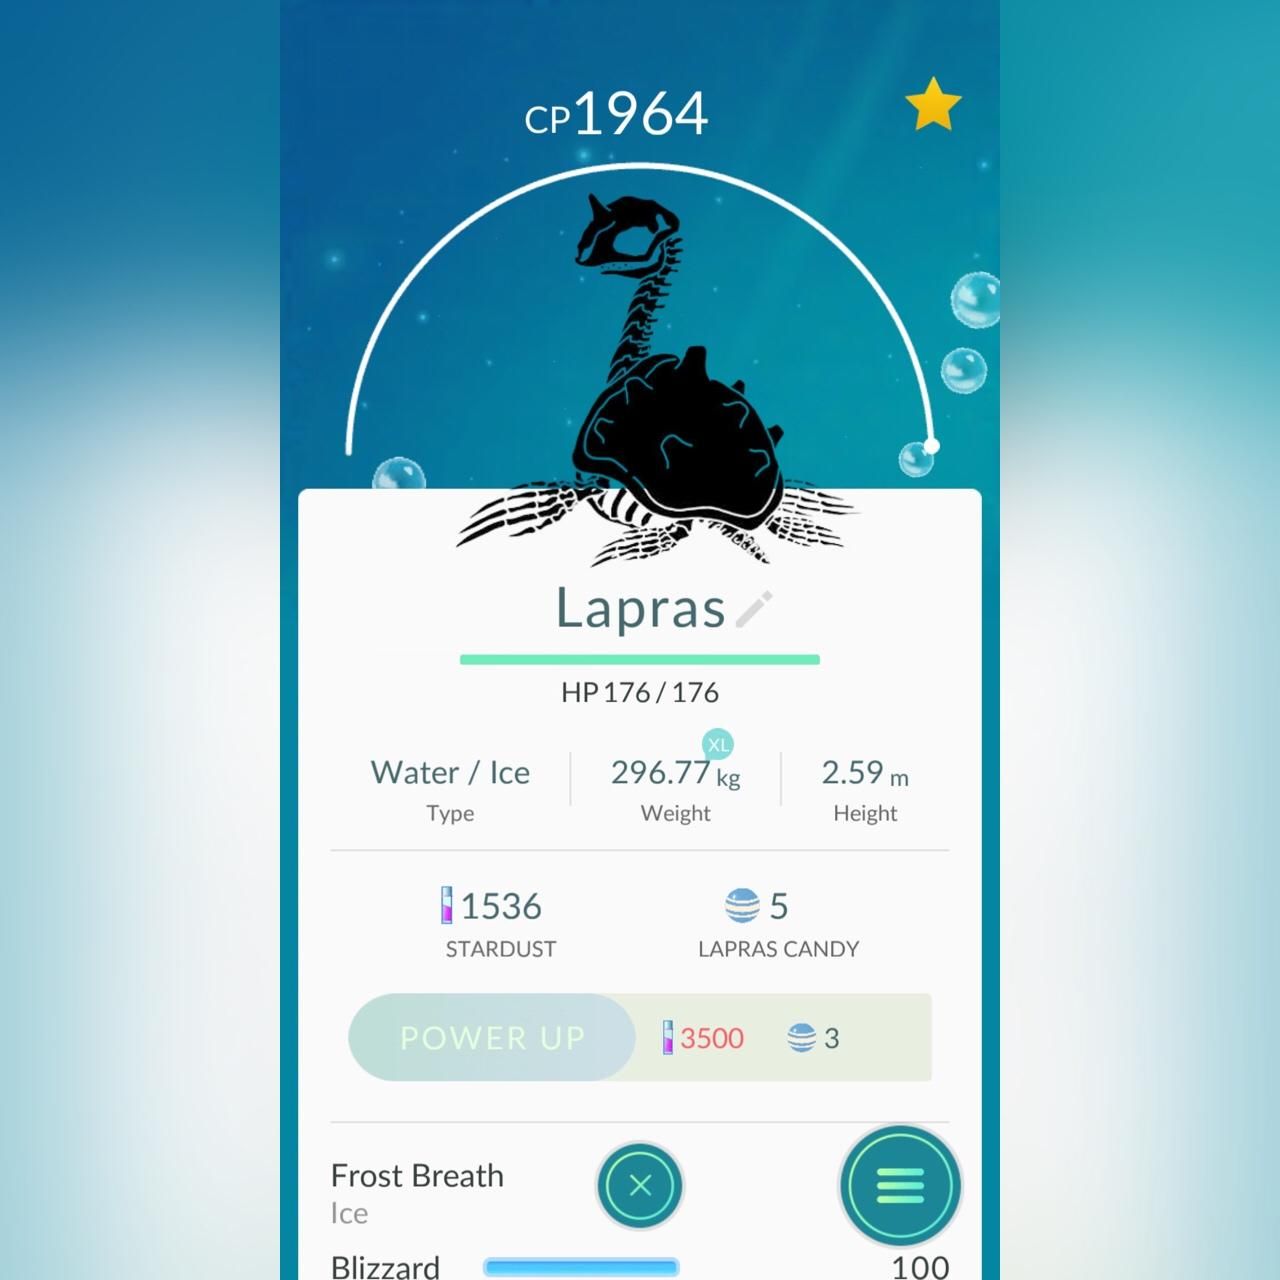 When you live in the desert and you hatch a Lapras